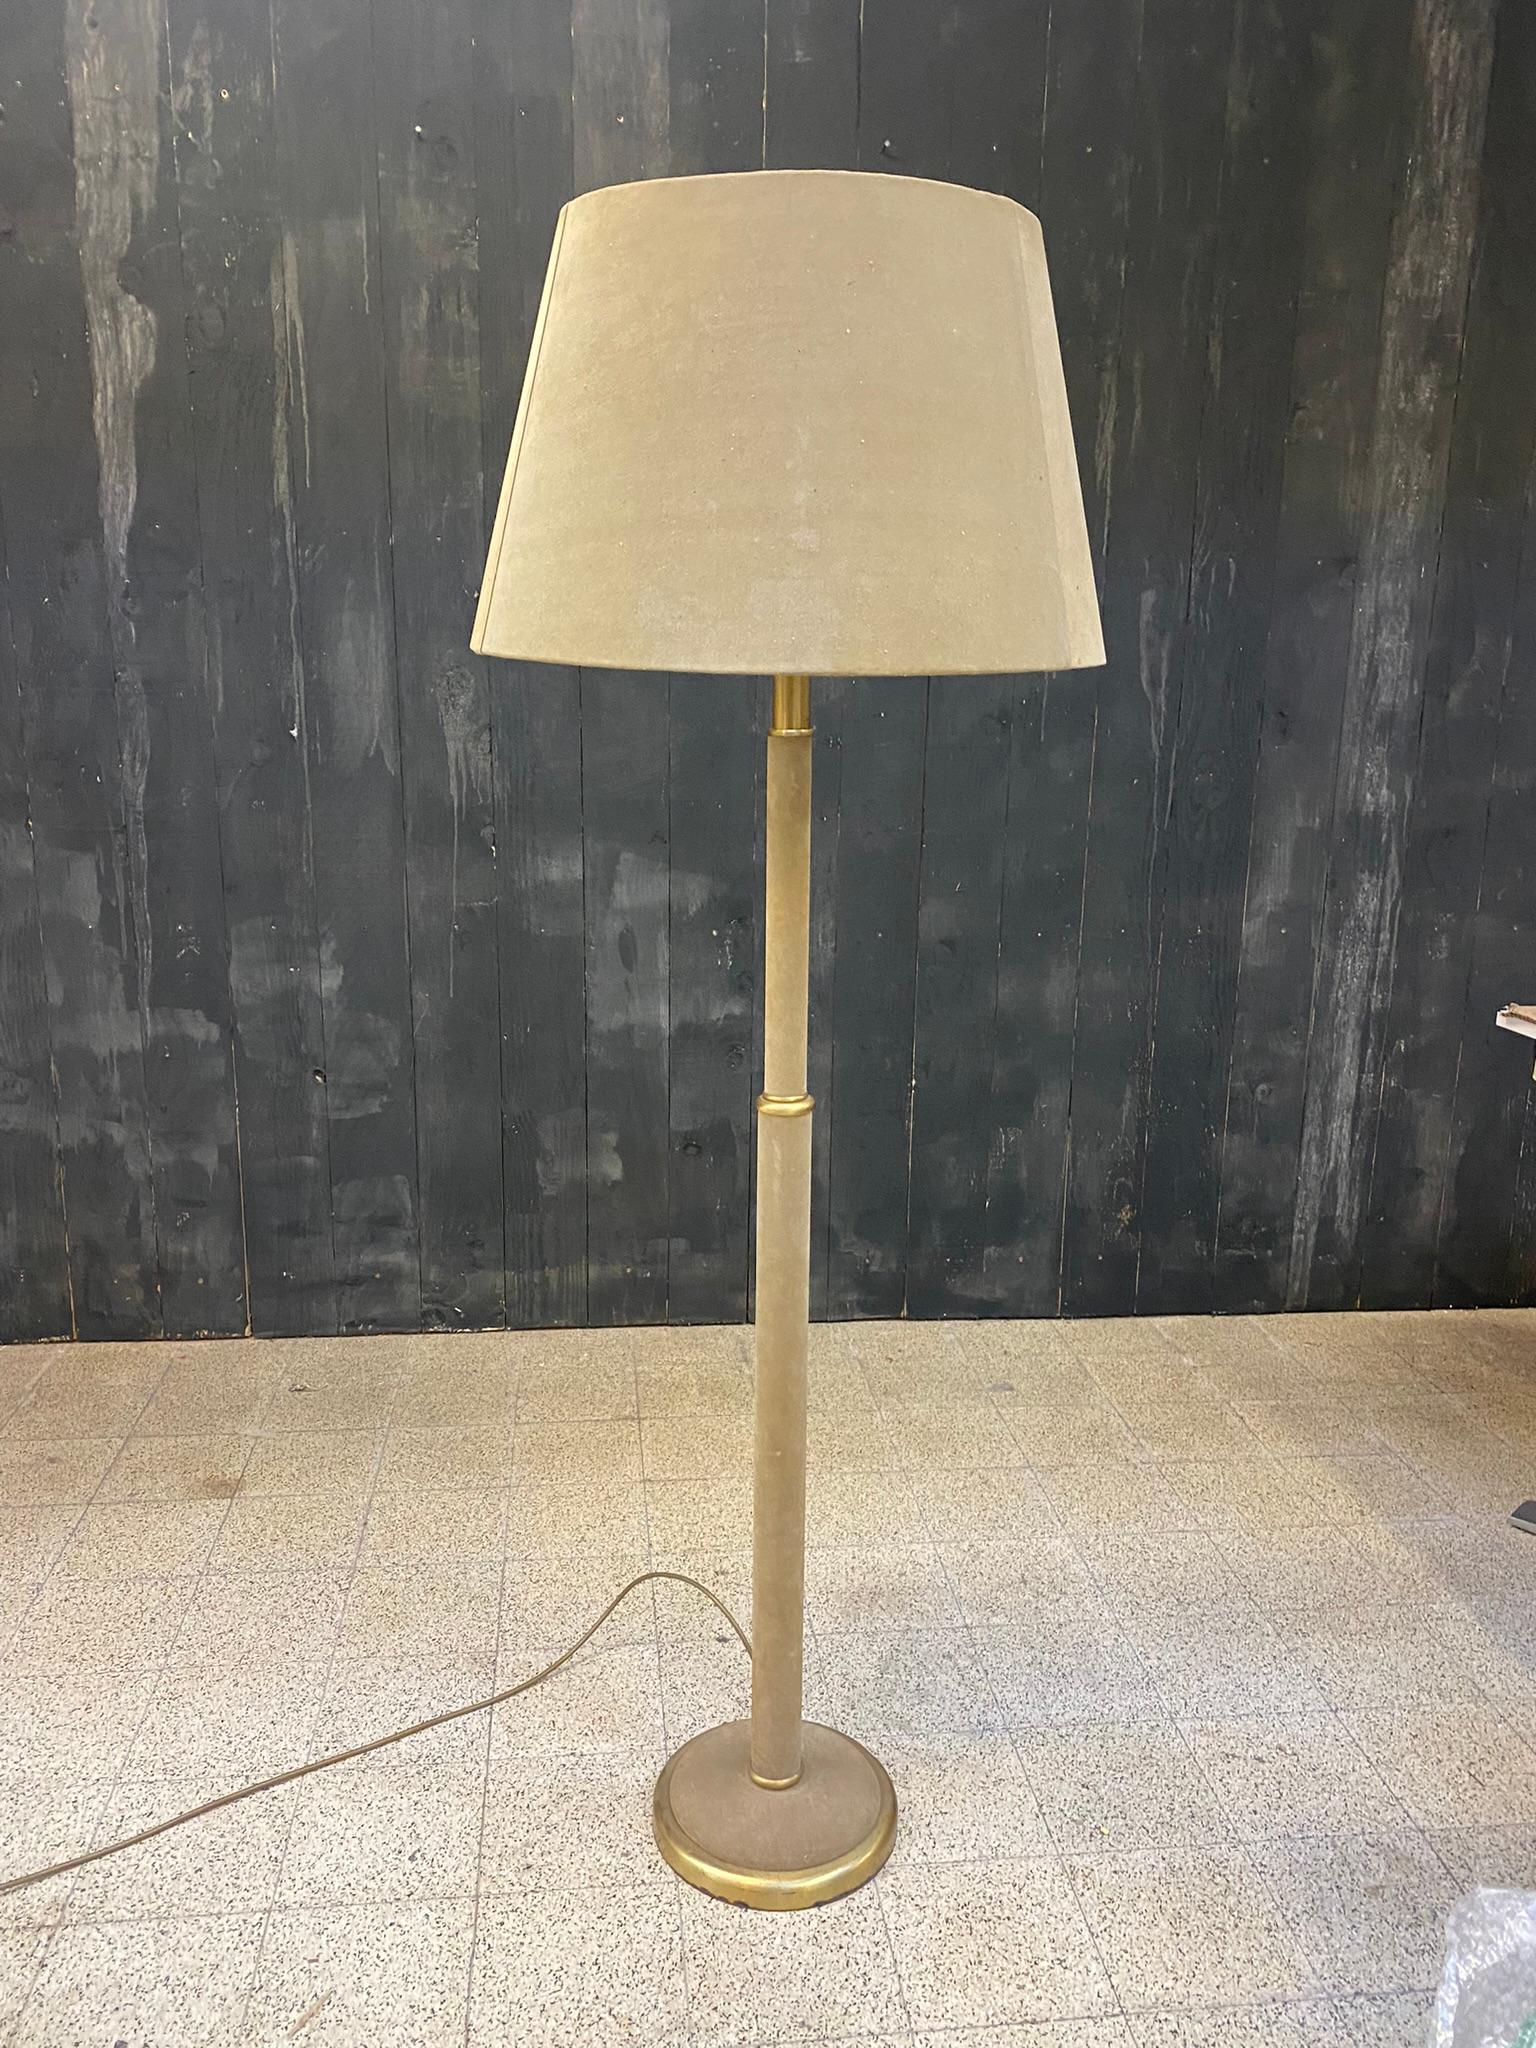 Mid-Century Modern Elegant Floor Lamp in Suede Leather in the Style of Jacques Adnet, circa 1960 For Sale